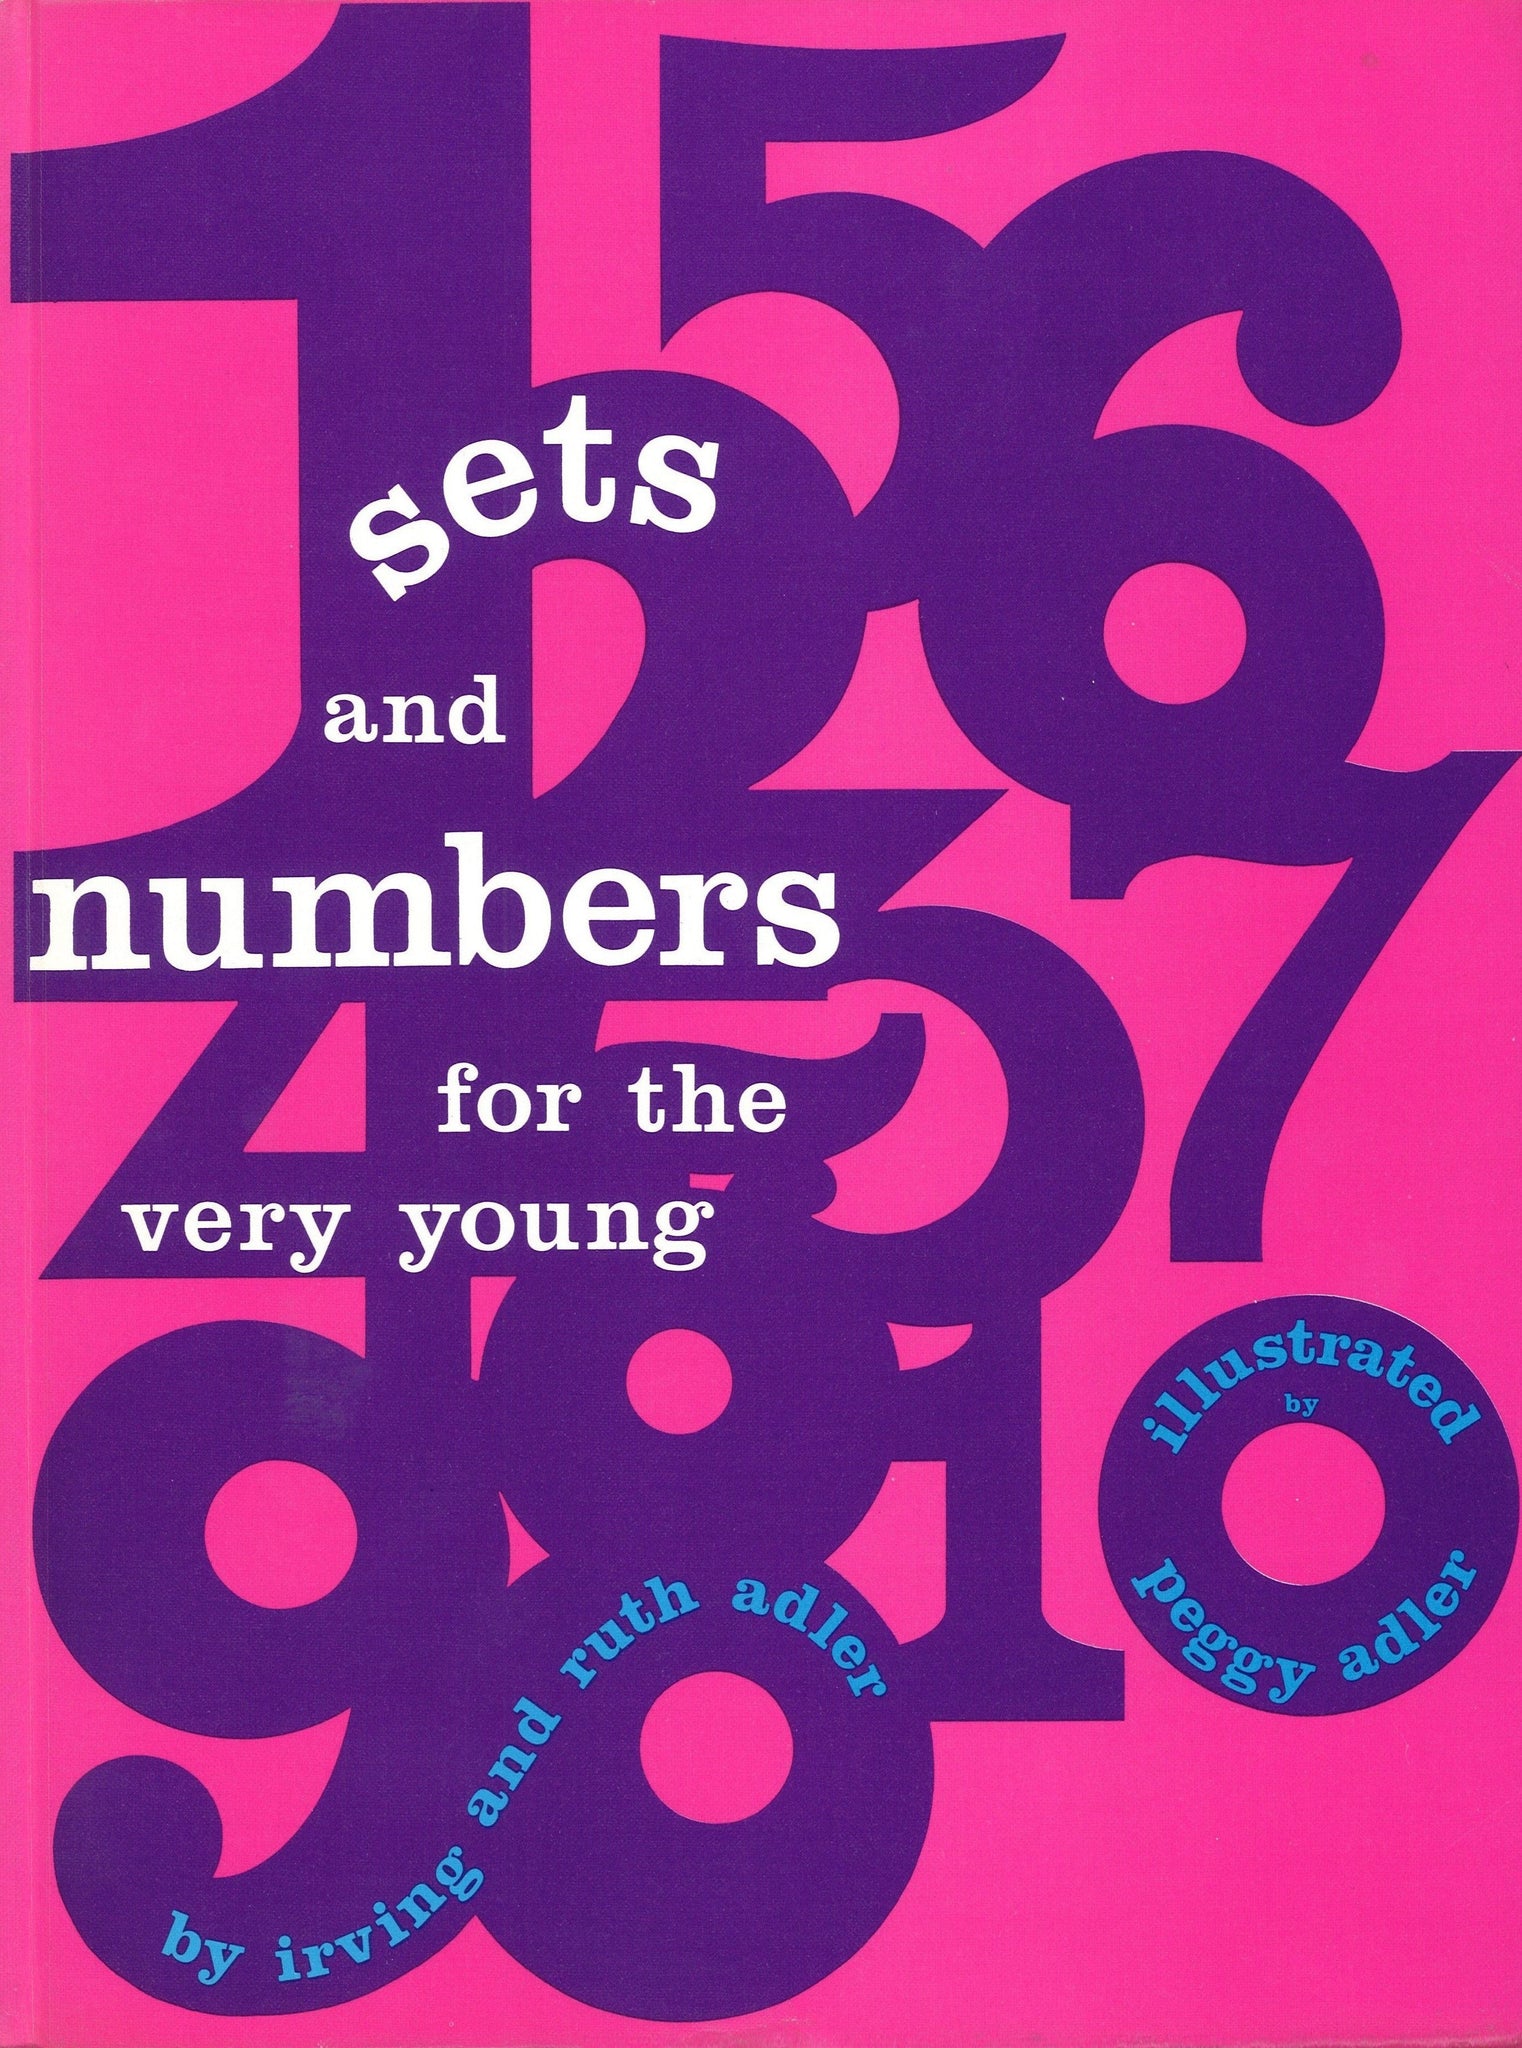 Sets and Numbers for the Very Young (ebook)